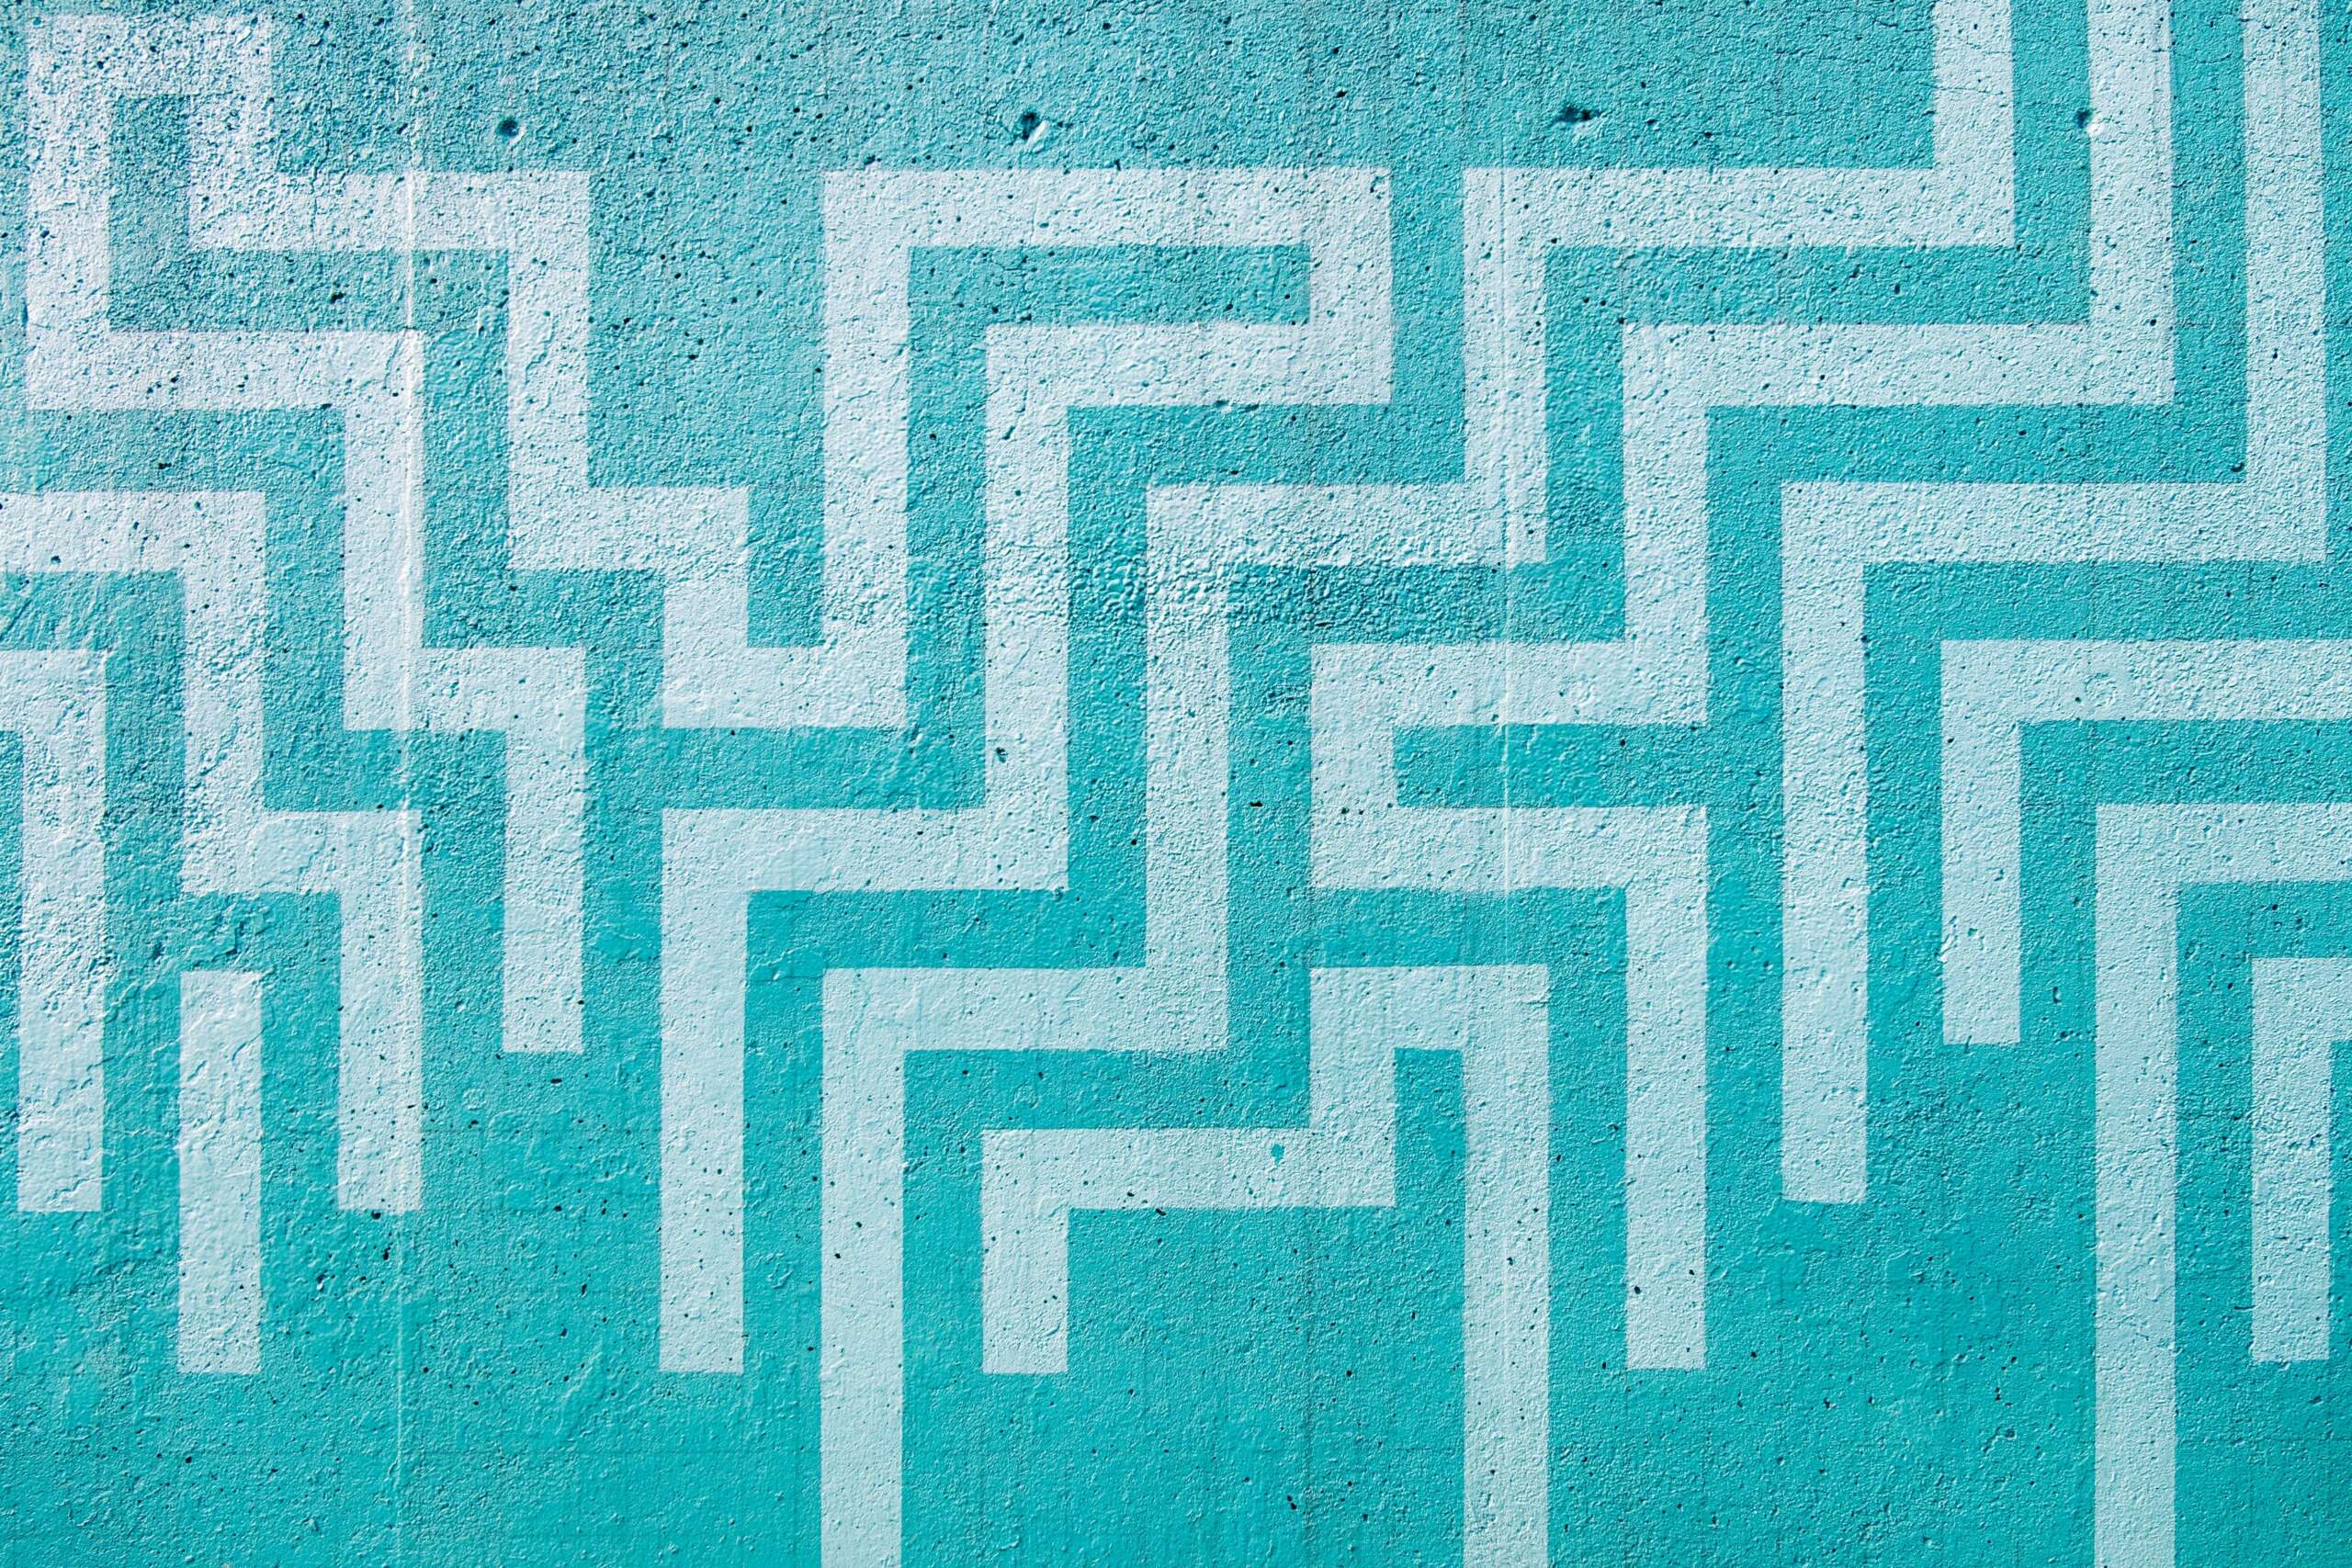 Image of a blue maze painted on a wall to signify stress addiction.